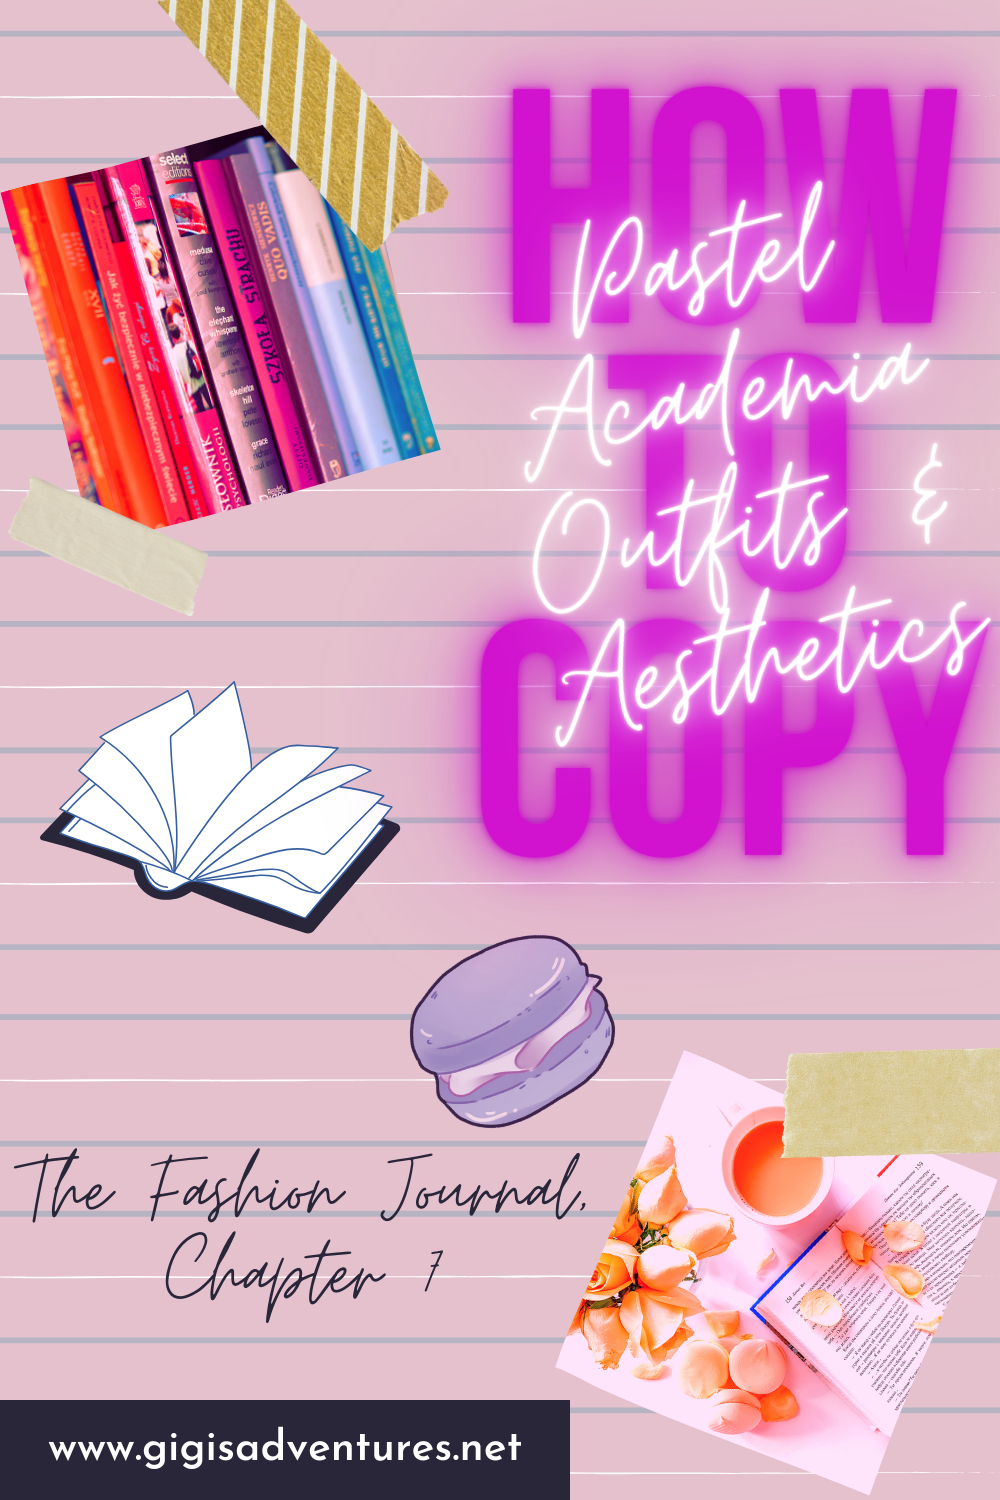 How To Copy Pastel Academia Aesthetics & Outfits | The Fashion Journal